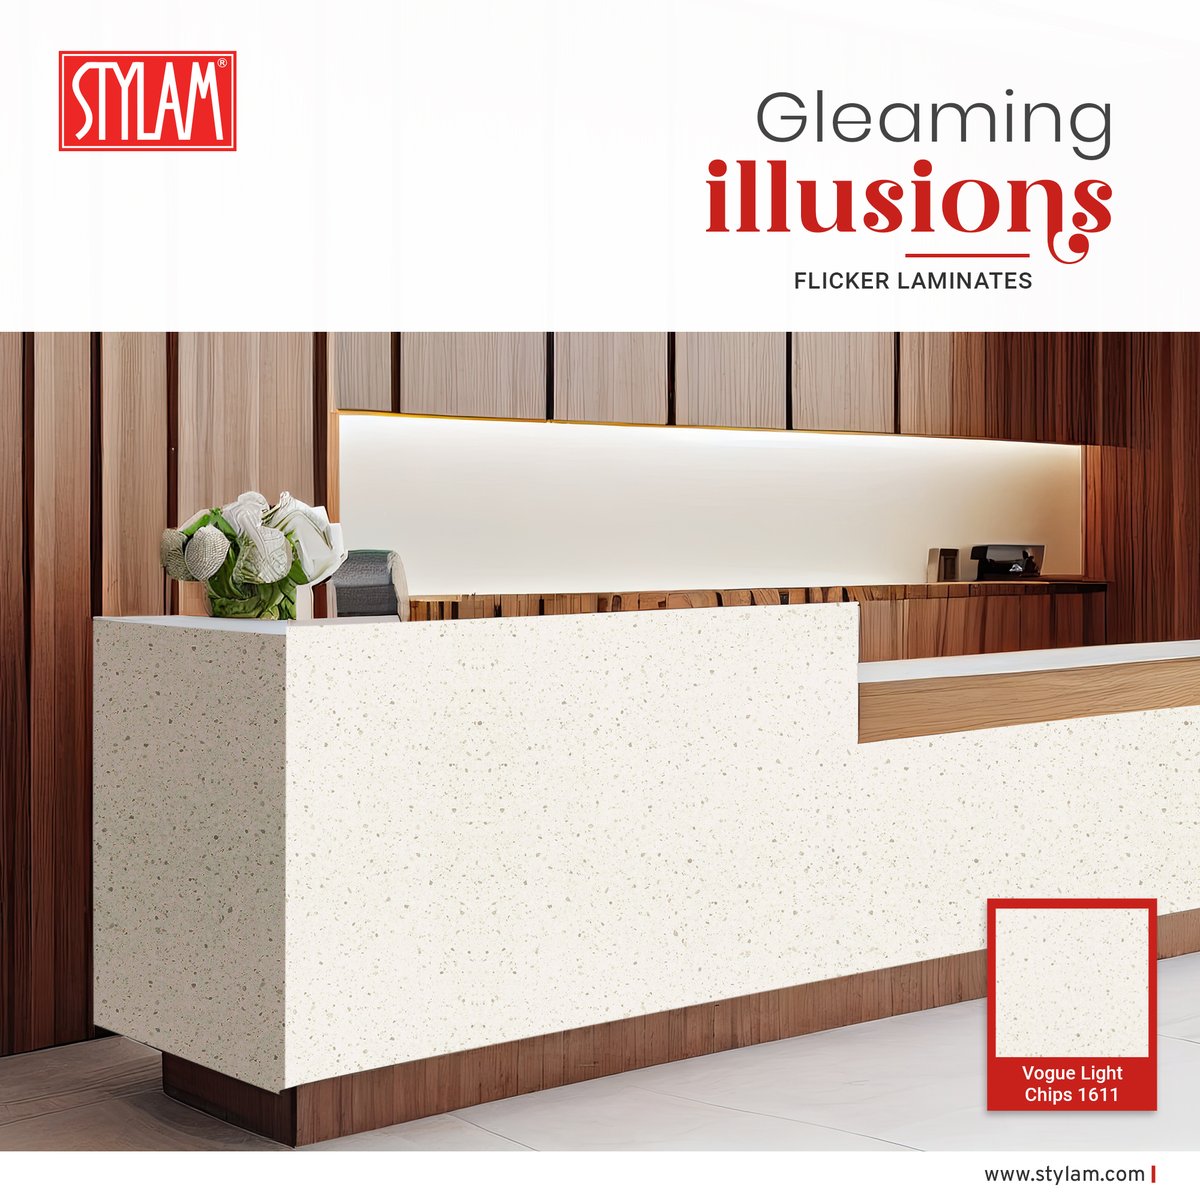 Bringing gleaming illusions to life with Flicker Laminate by Stylam Laminates ✨✨ 

#Switch_To_Stylam

Get more details:
stylam.com

#stylam #stylamindustries #flickerlaminate #flicker #hygiene #decorative #interiordesigns #KitchenMakeover #DesignMatters